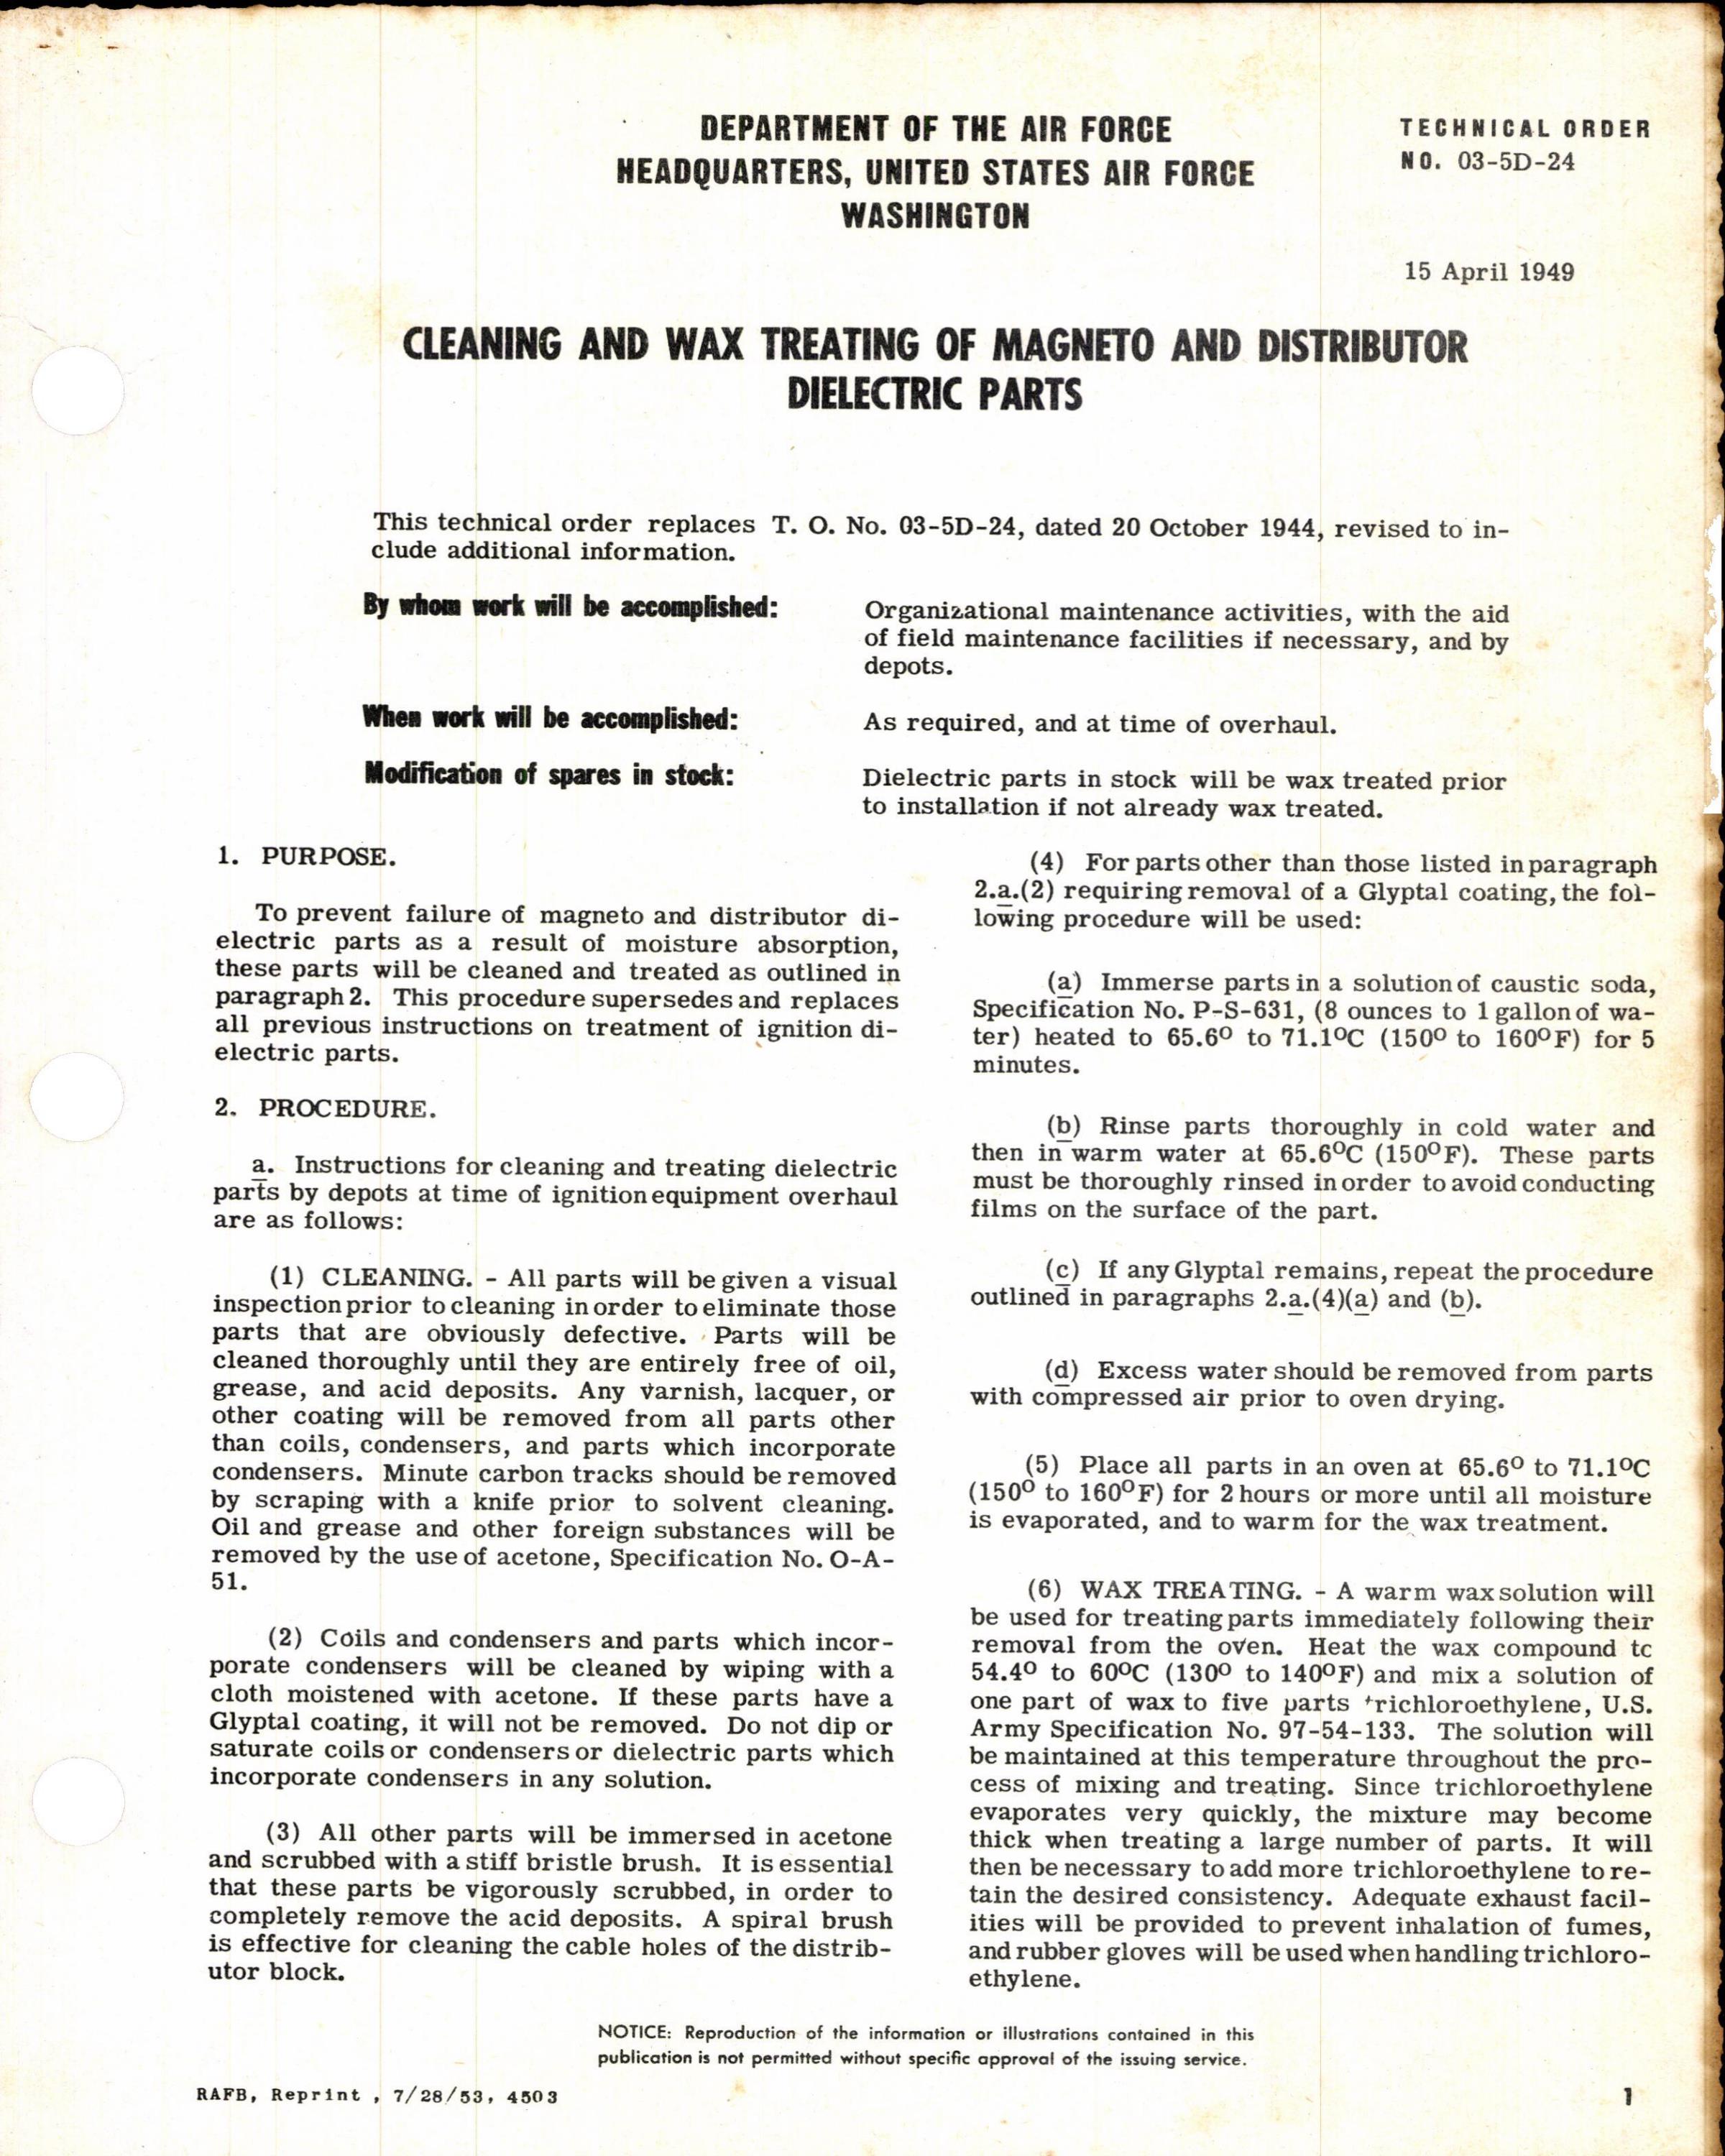 Sample page 1 from AirCorps Library document: Cleaning and Wax Treating of Magneto & Dielectric Parts